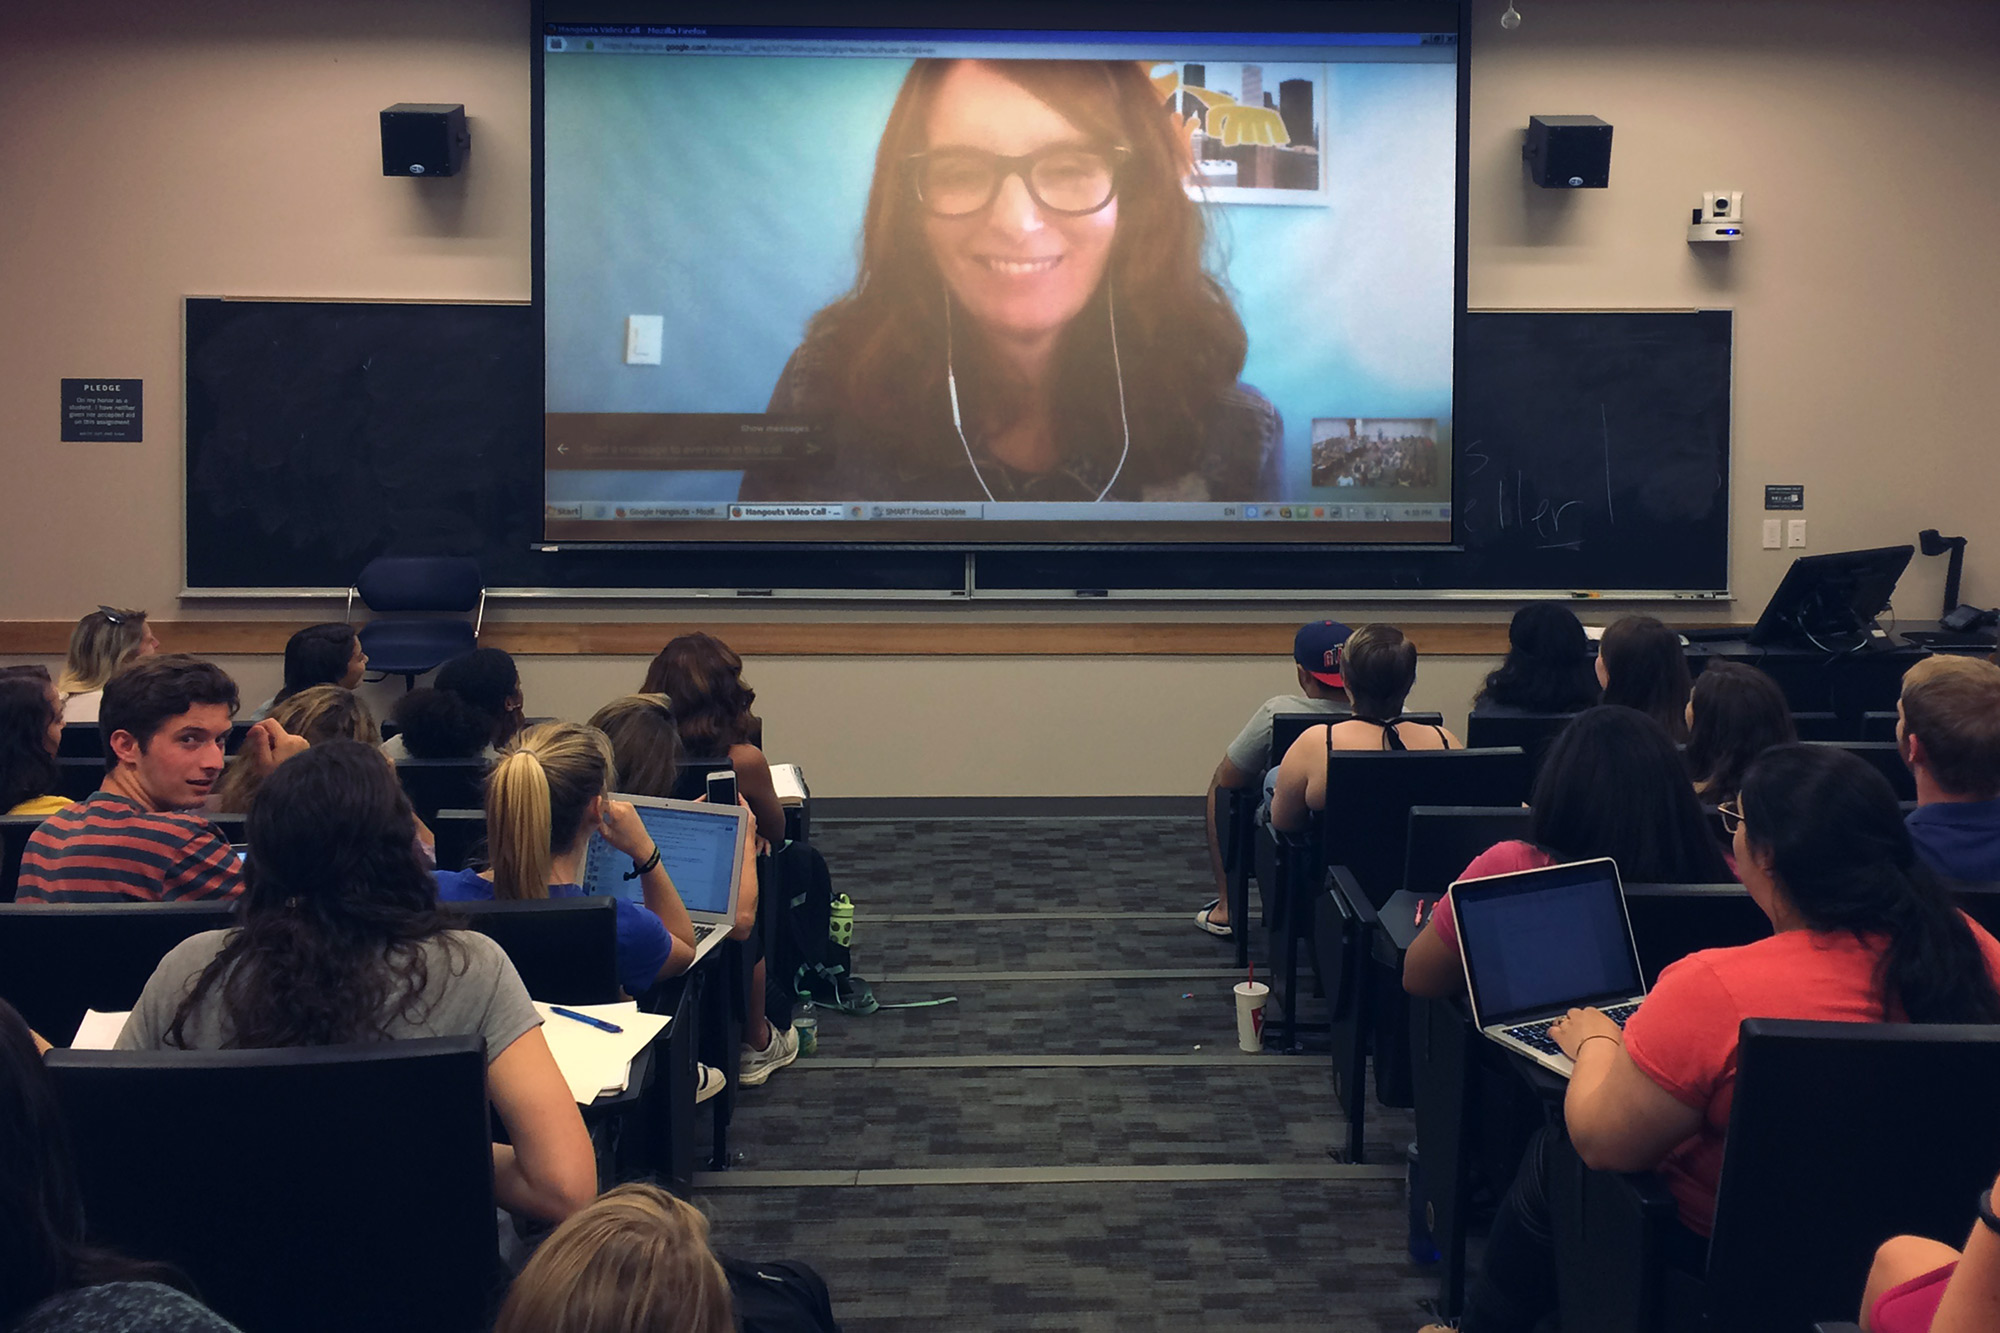 Students watching Tina Fey on a screen